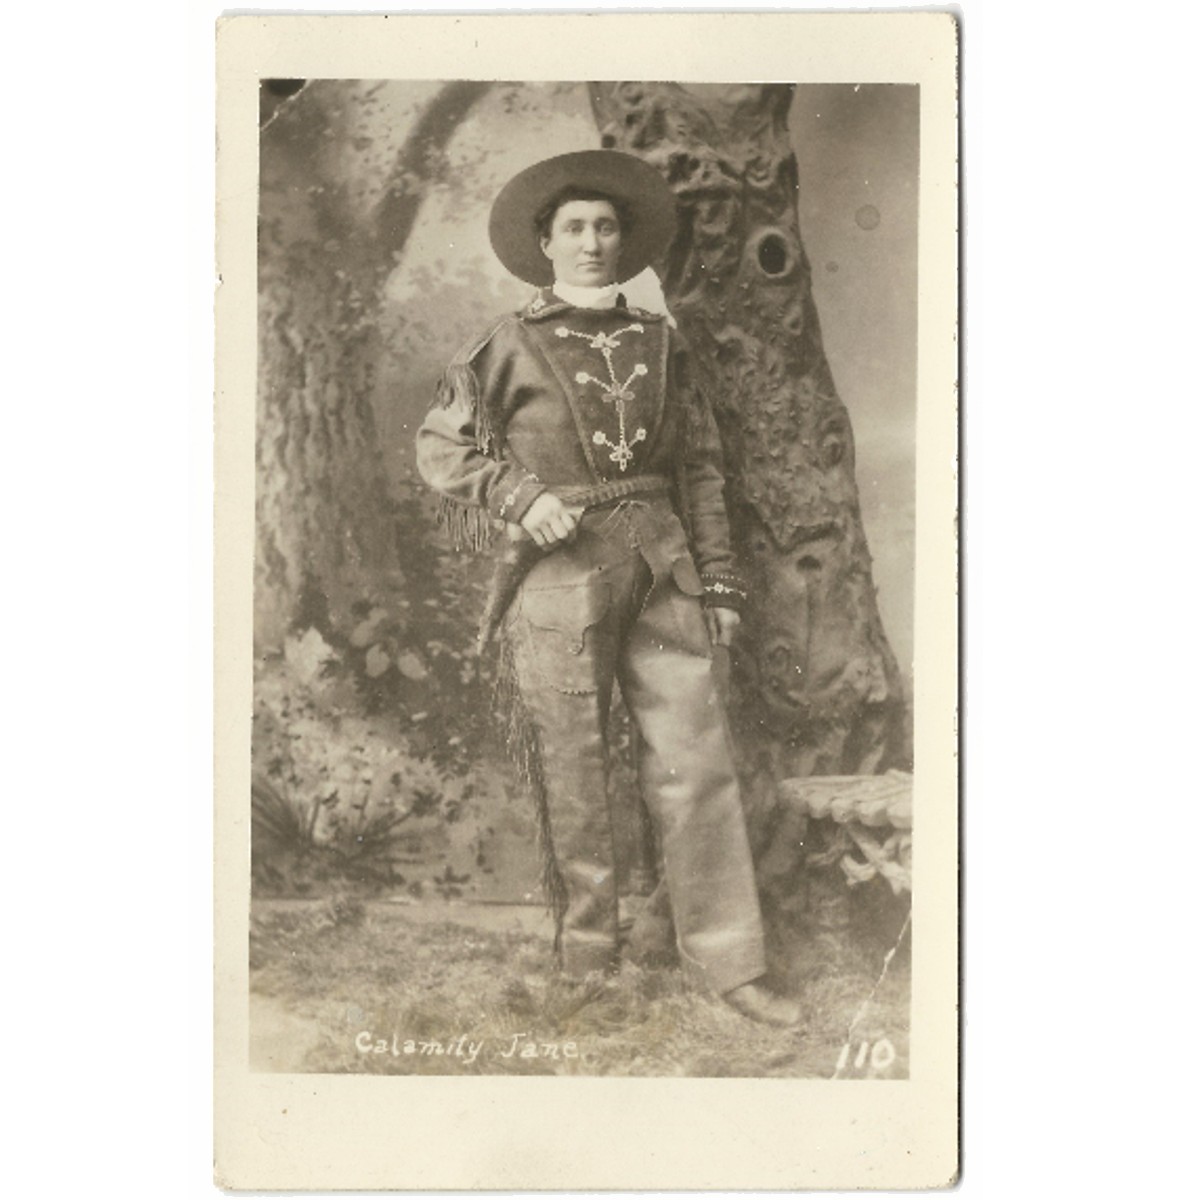 Rare and early photograph of Calamity Jane - Circa 1880s